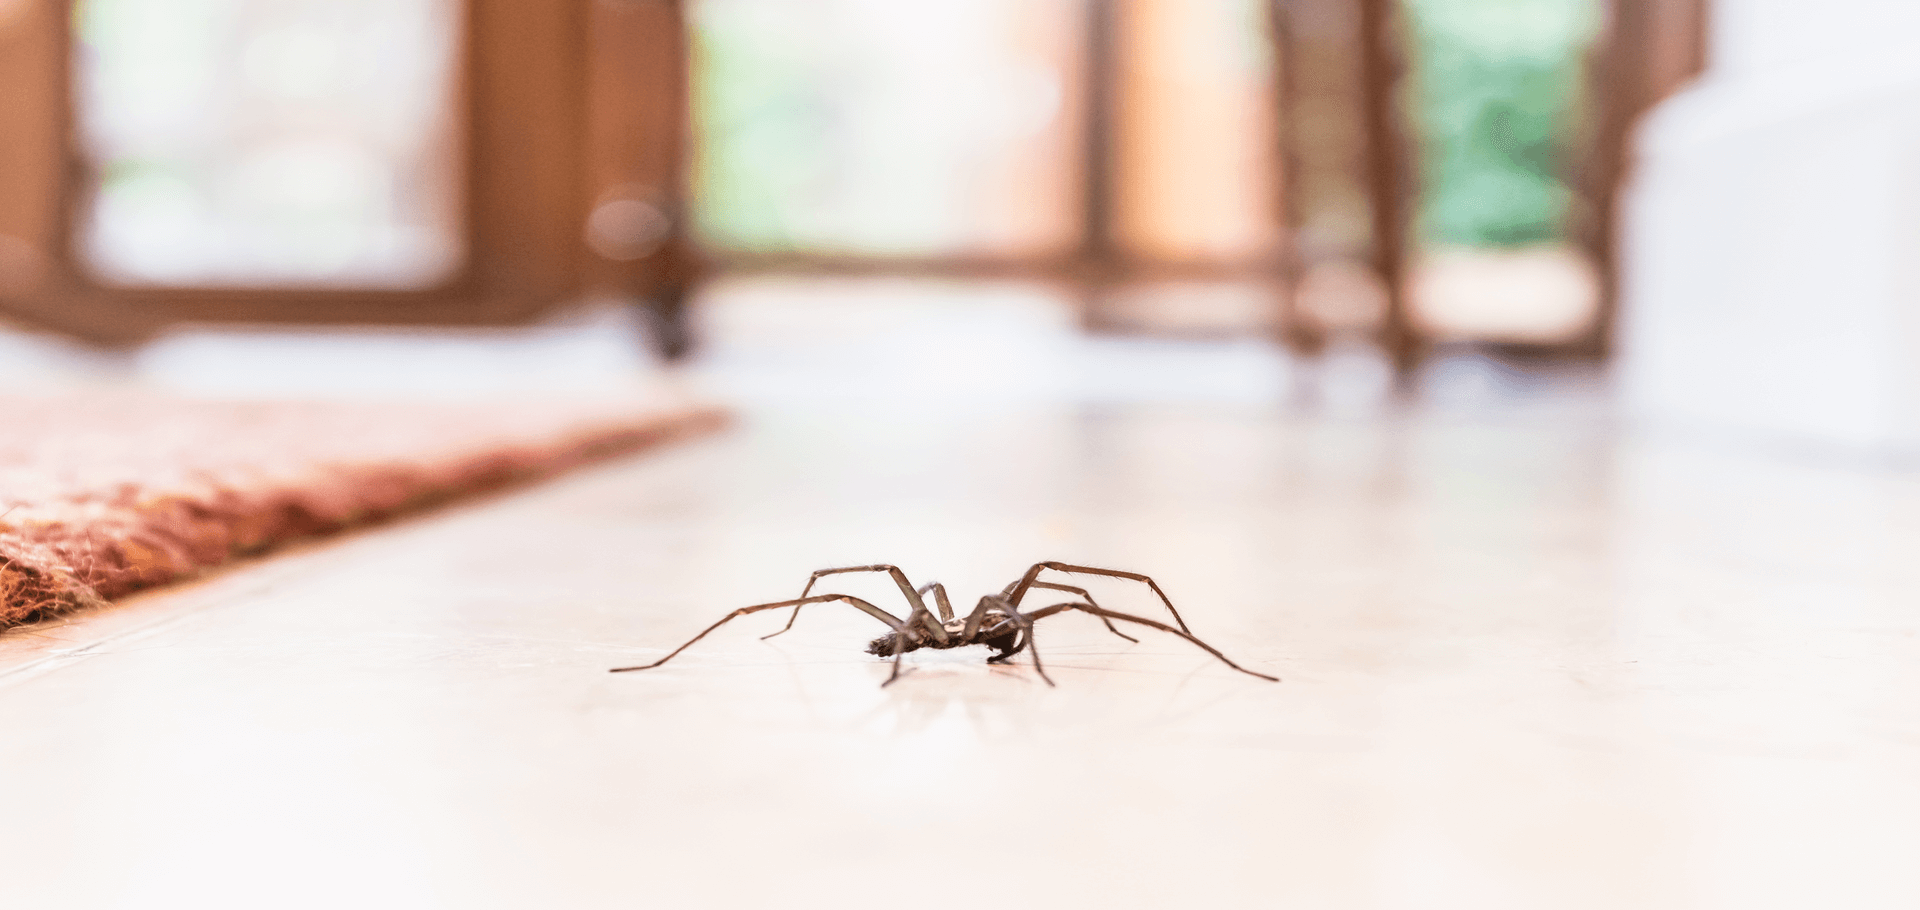 Why Spiders Are More Noticeable When It Gets Cold